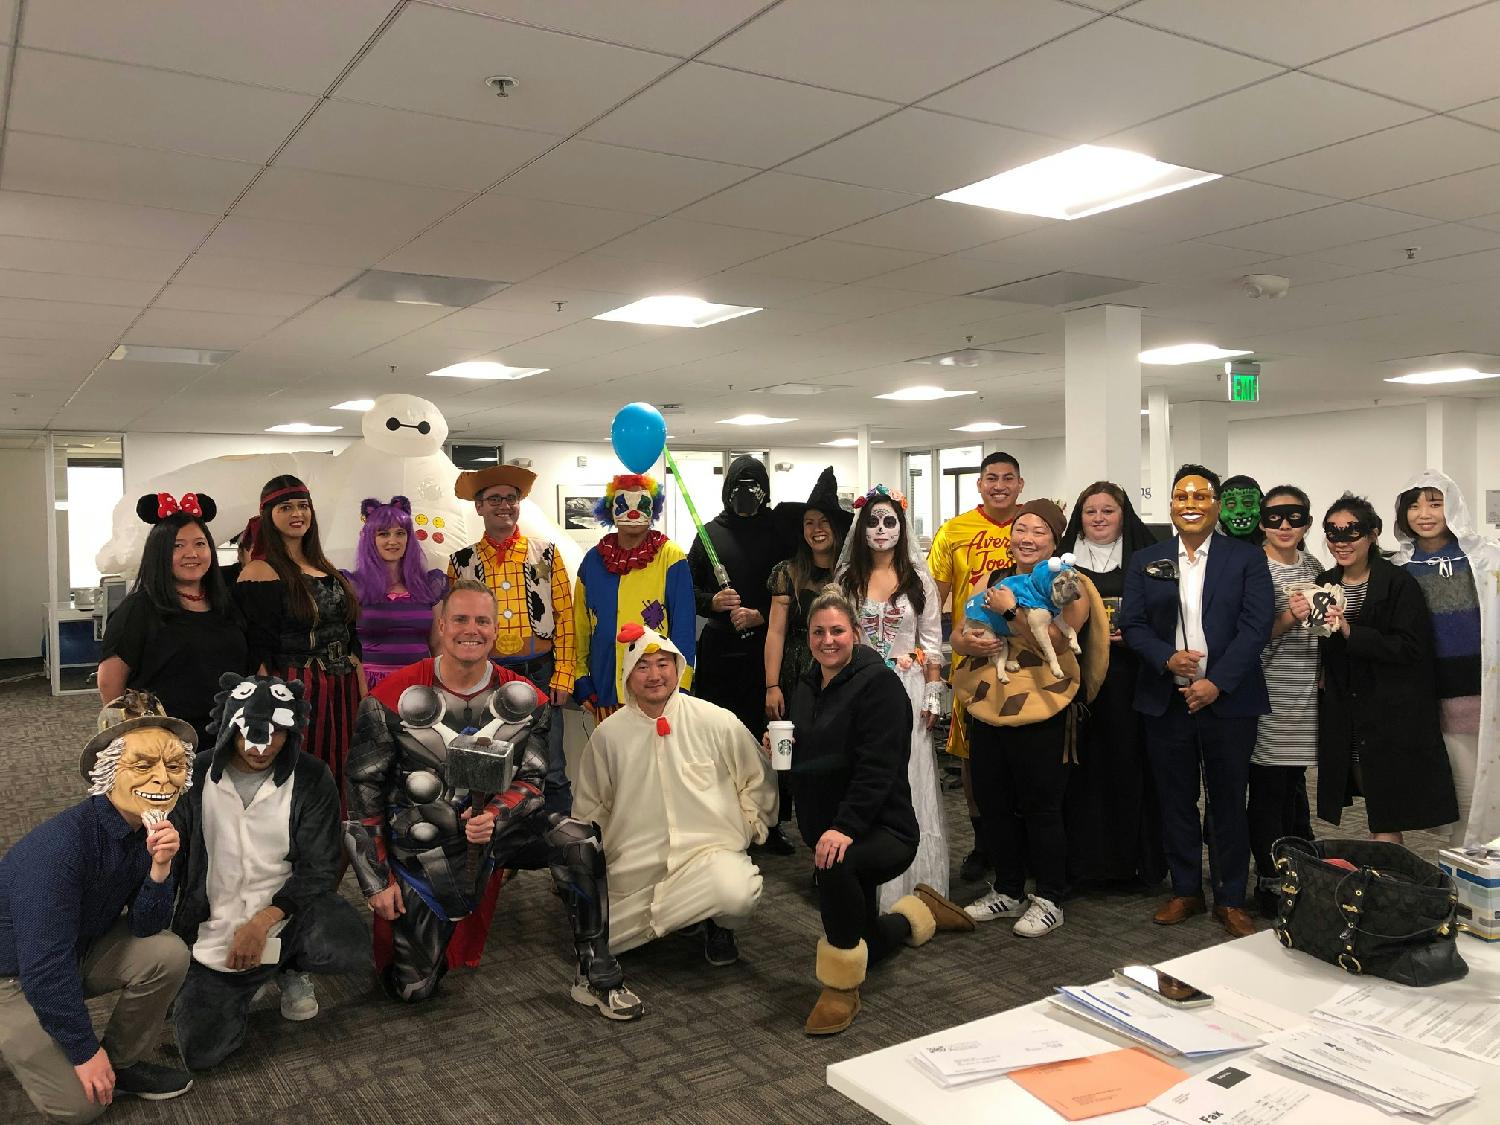 Halloween 2019 - we're very competitive at the office with our costumes.